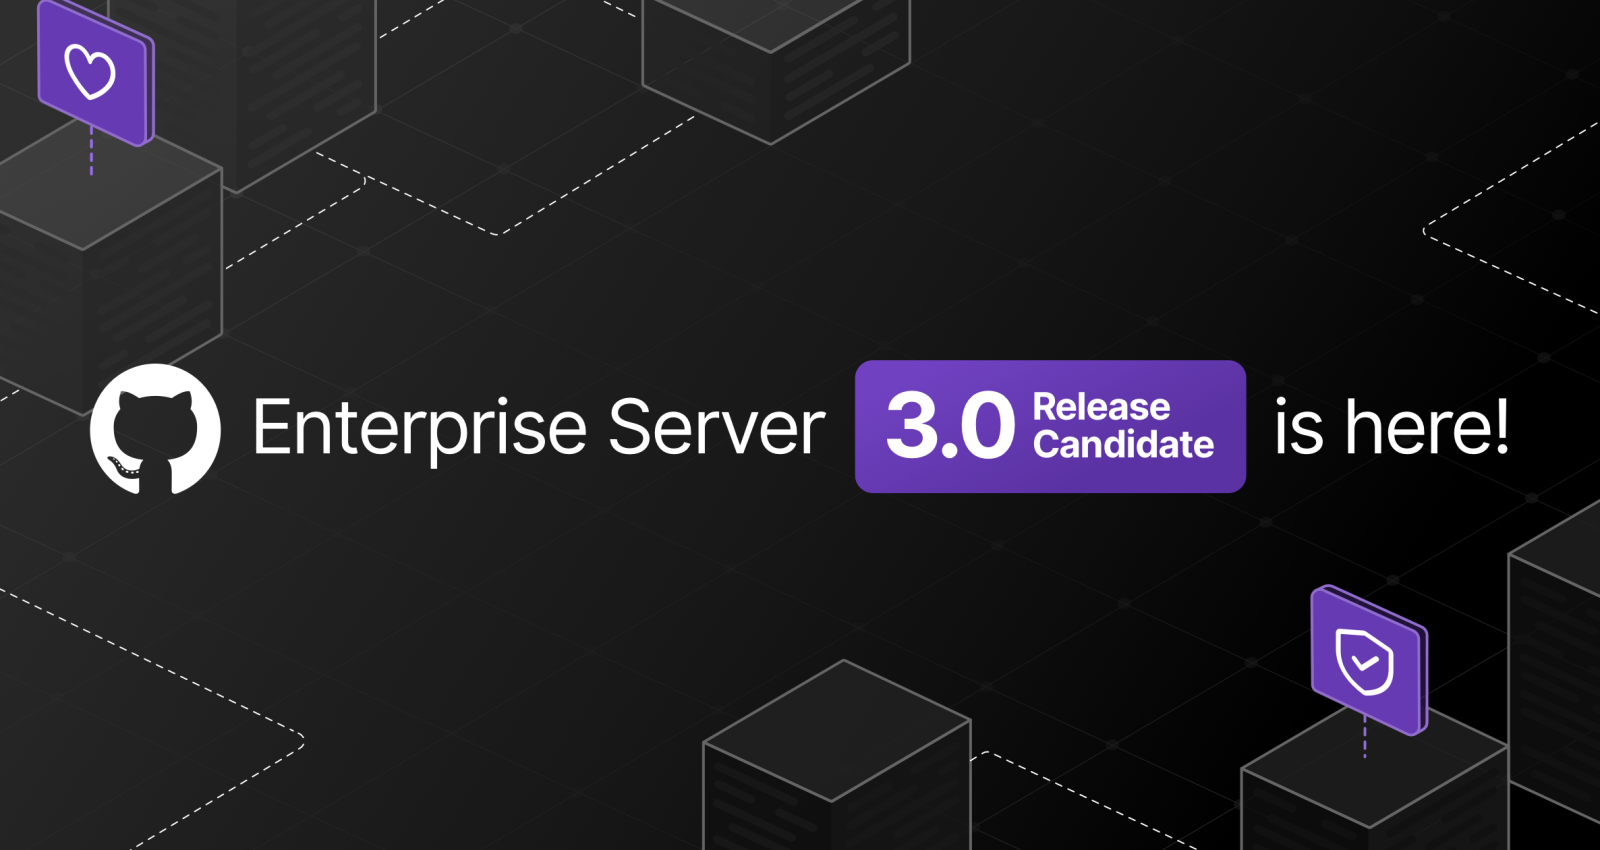 GitHub Enterprise Server 3.0 available as a release candidate!